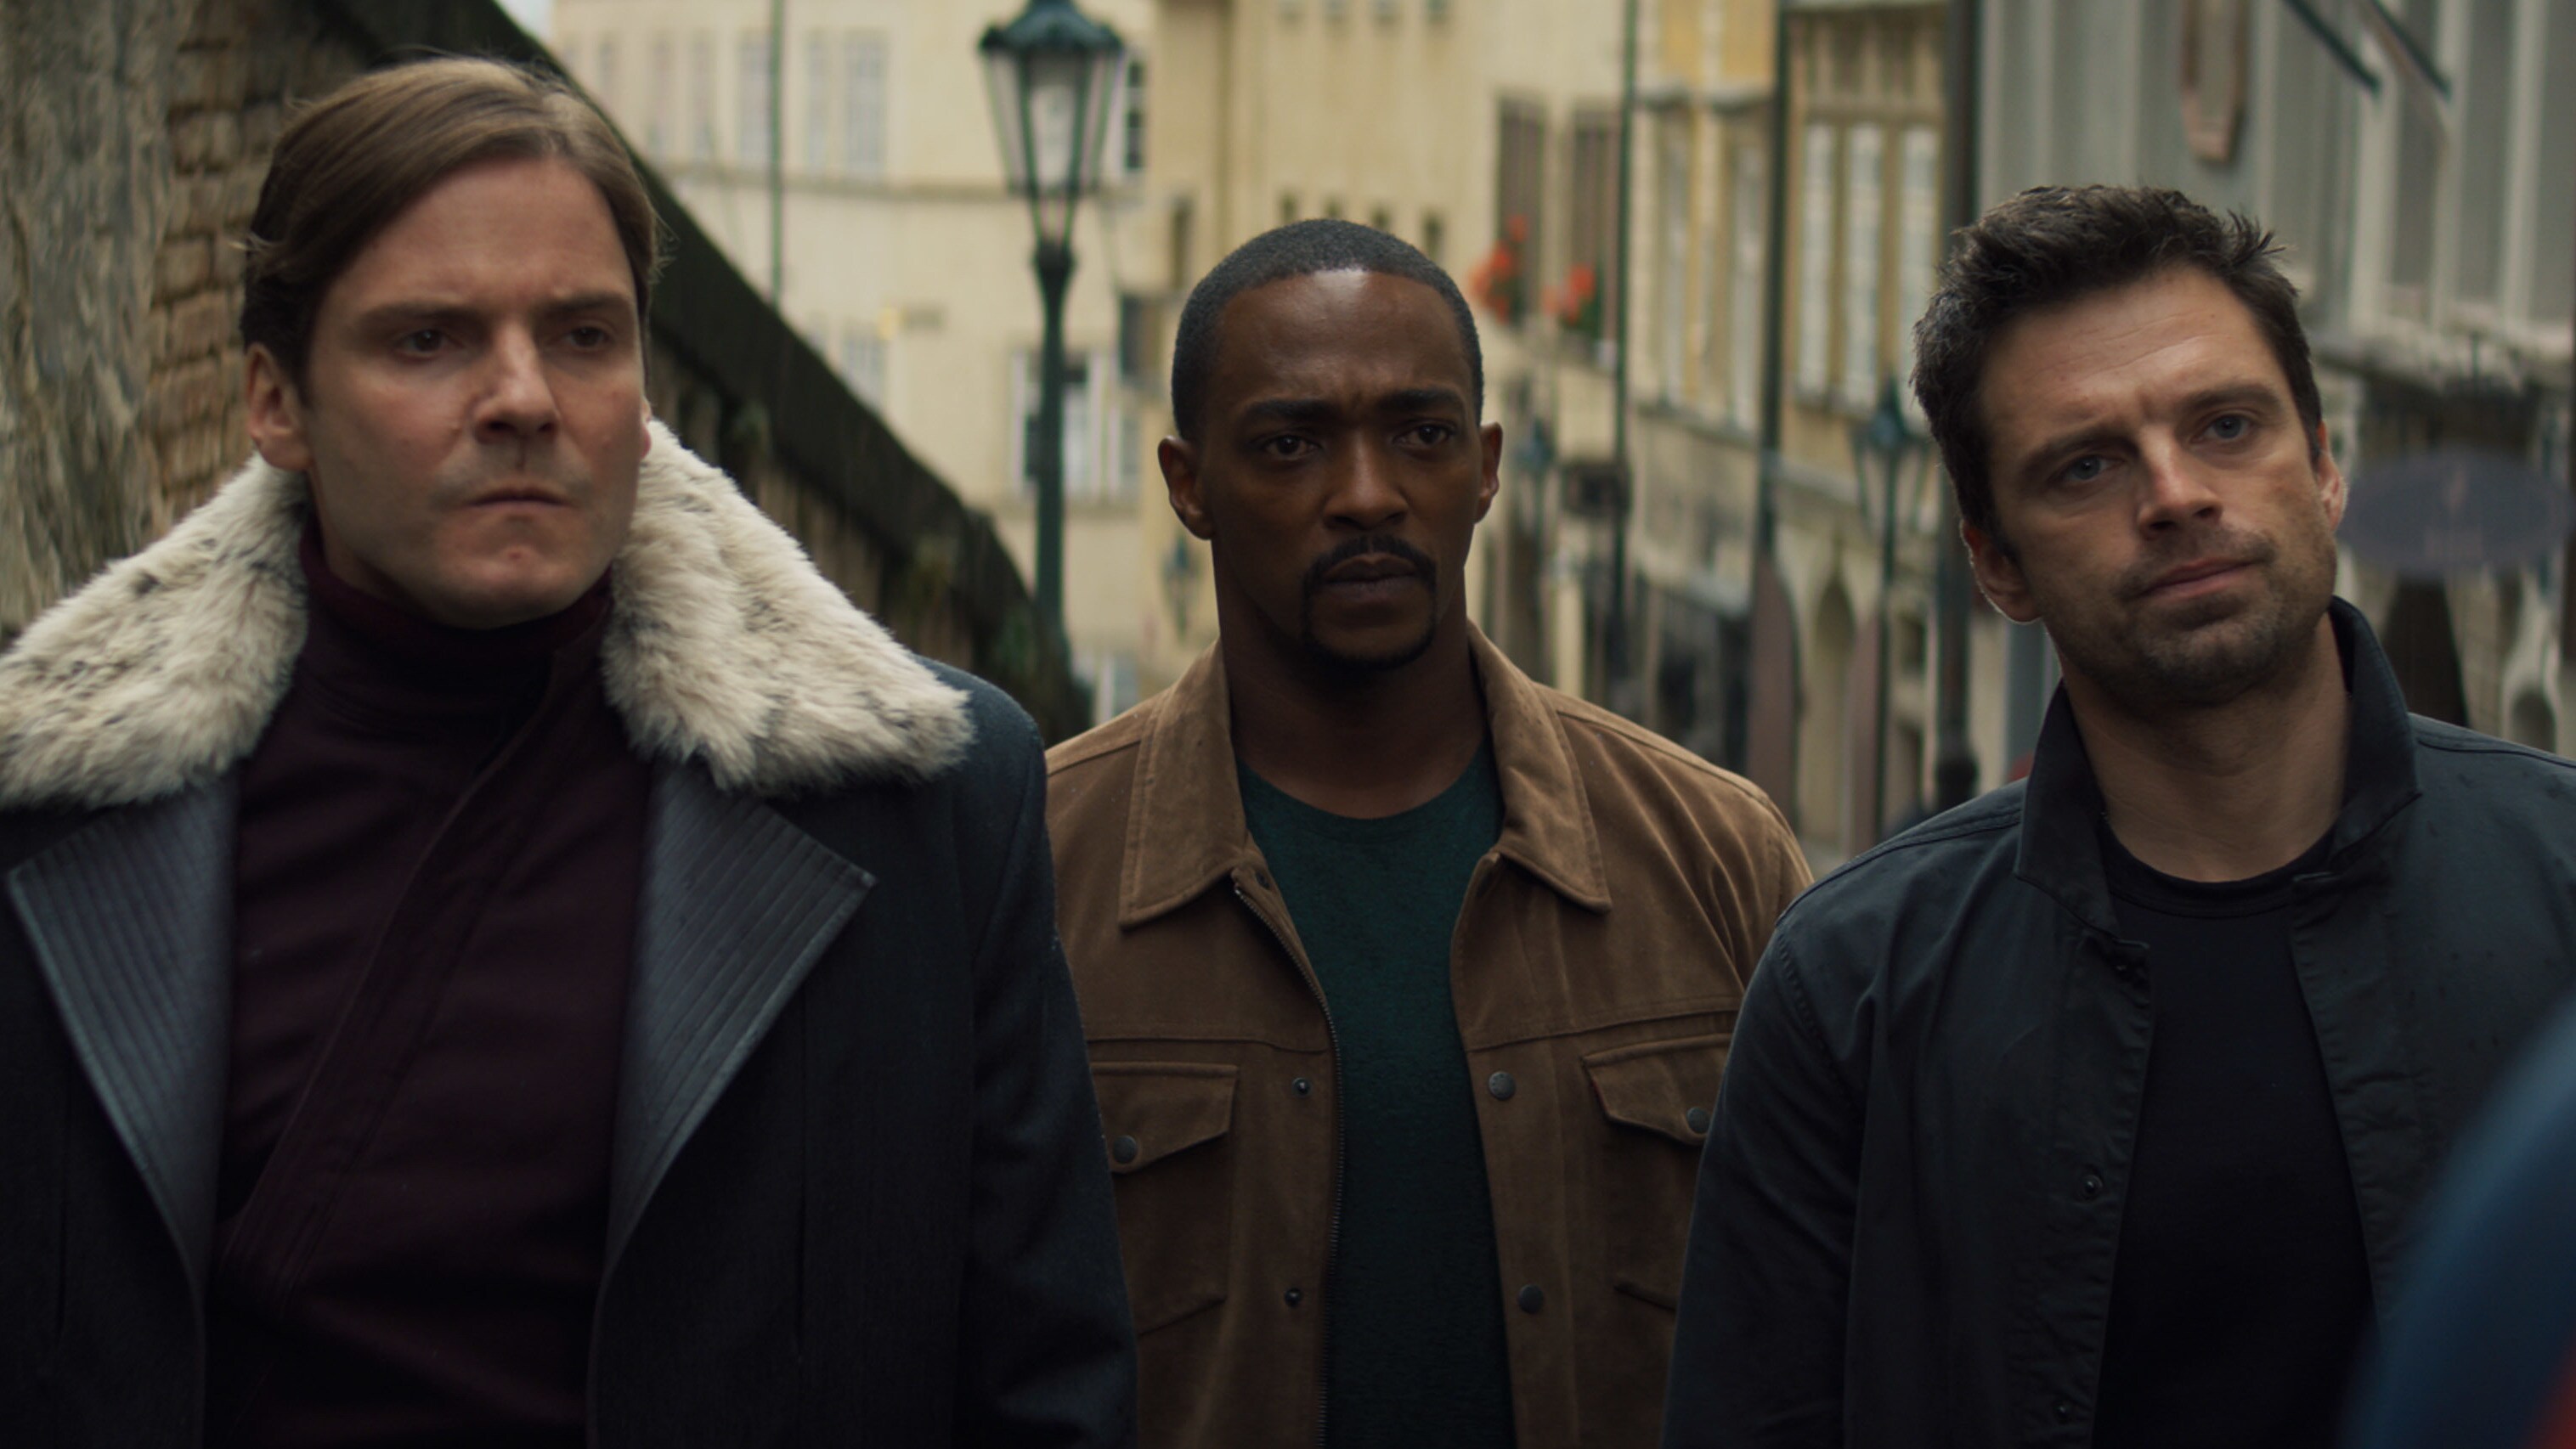 (L-R): Zemo (Daniel Brühl), Falcon/Sam Wilson (Anthony Mackie) and Winter Soldier/Bucky Barnes (Sebastian Stan) in Marvel Studios' THE FALCON AND THE WINTER SOLDIER exclusively on Disney+. Photo courtesy of Marvel Studios. ©Marvel Studios 2021. All Rights Reserved.